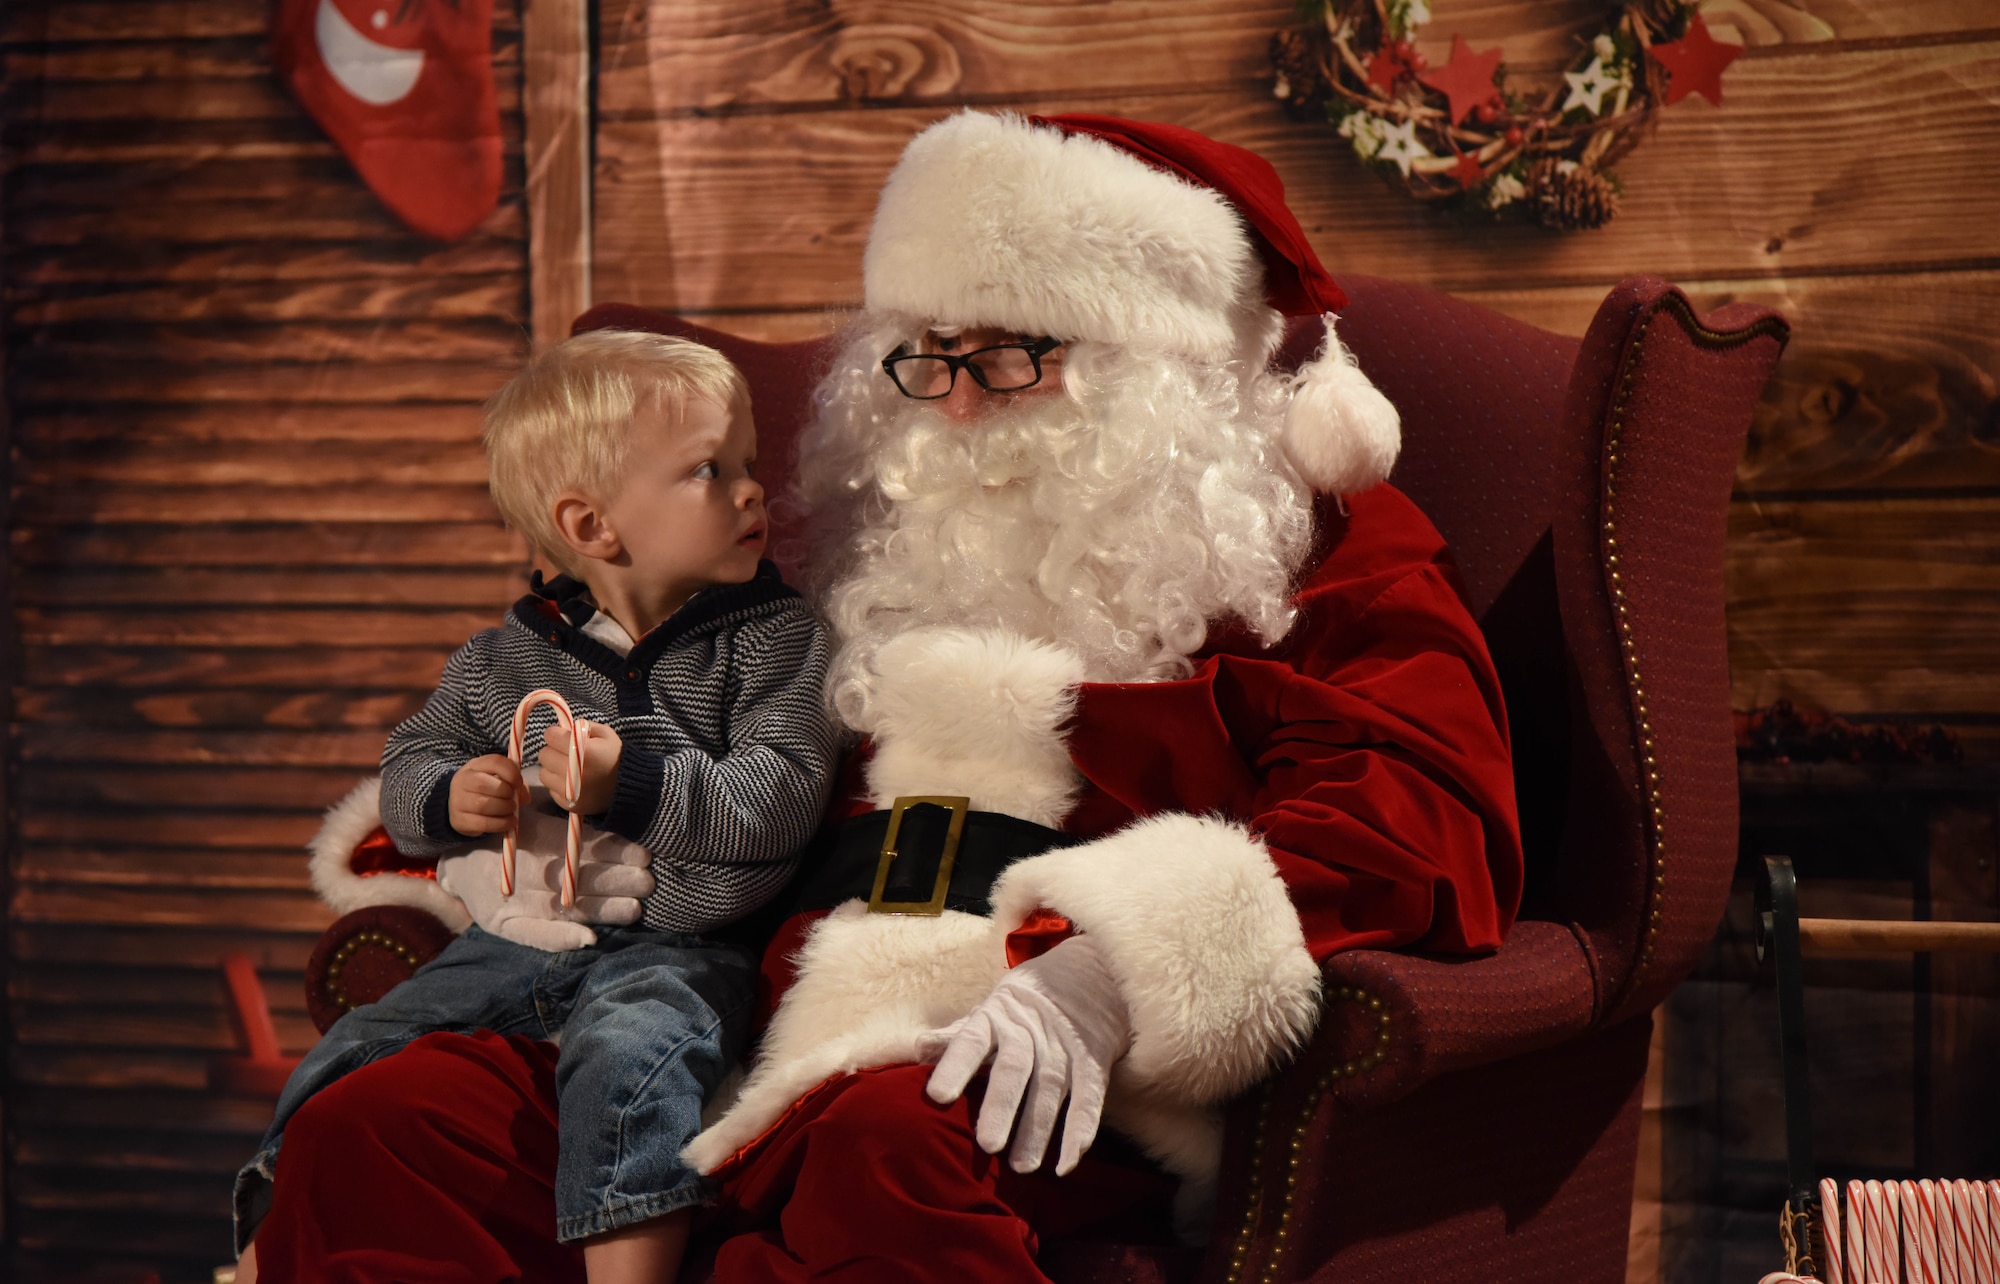 Brant Gilkison, son of Maj. Karin Gilkison, 81st Medical Operations Squadron gastroenterologist, visits with Santa during Keesler’s annual Christmas celebration at the Bay Breeze Event Center Dec. 7, 2017, on Keesler Air Force Base, Mississippi. The event, hosted by Outdoor Recreation, included cookie and ornament decorating, games and visits with Santa. (U.S. Air Force photo by Kemberly Groue)